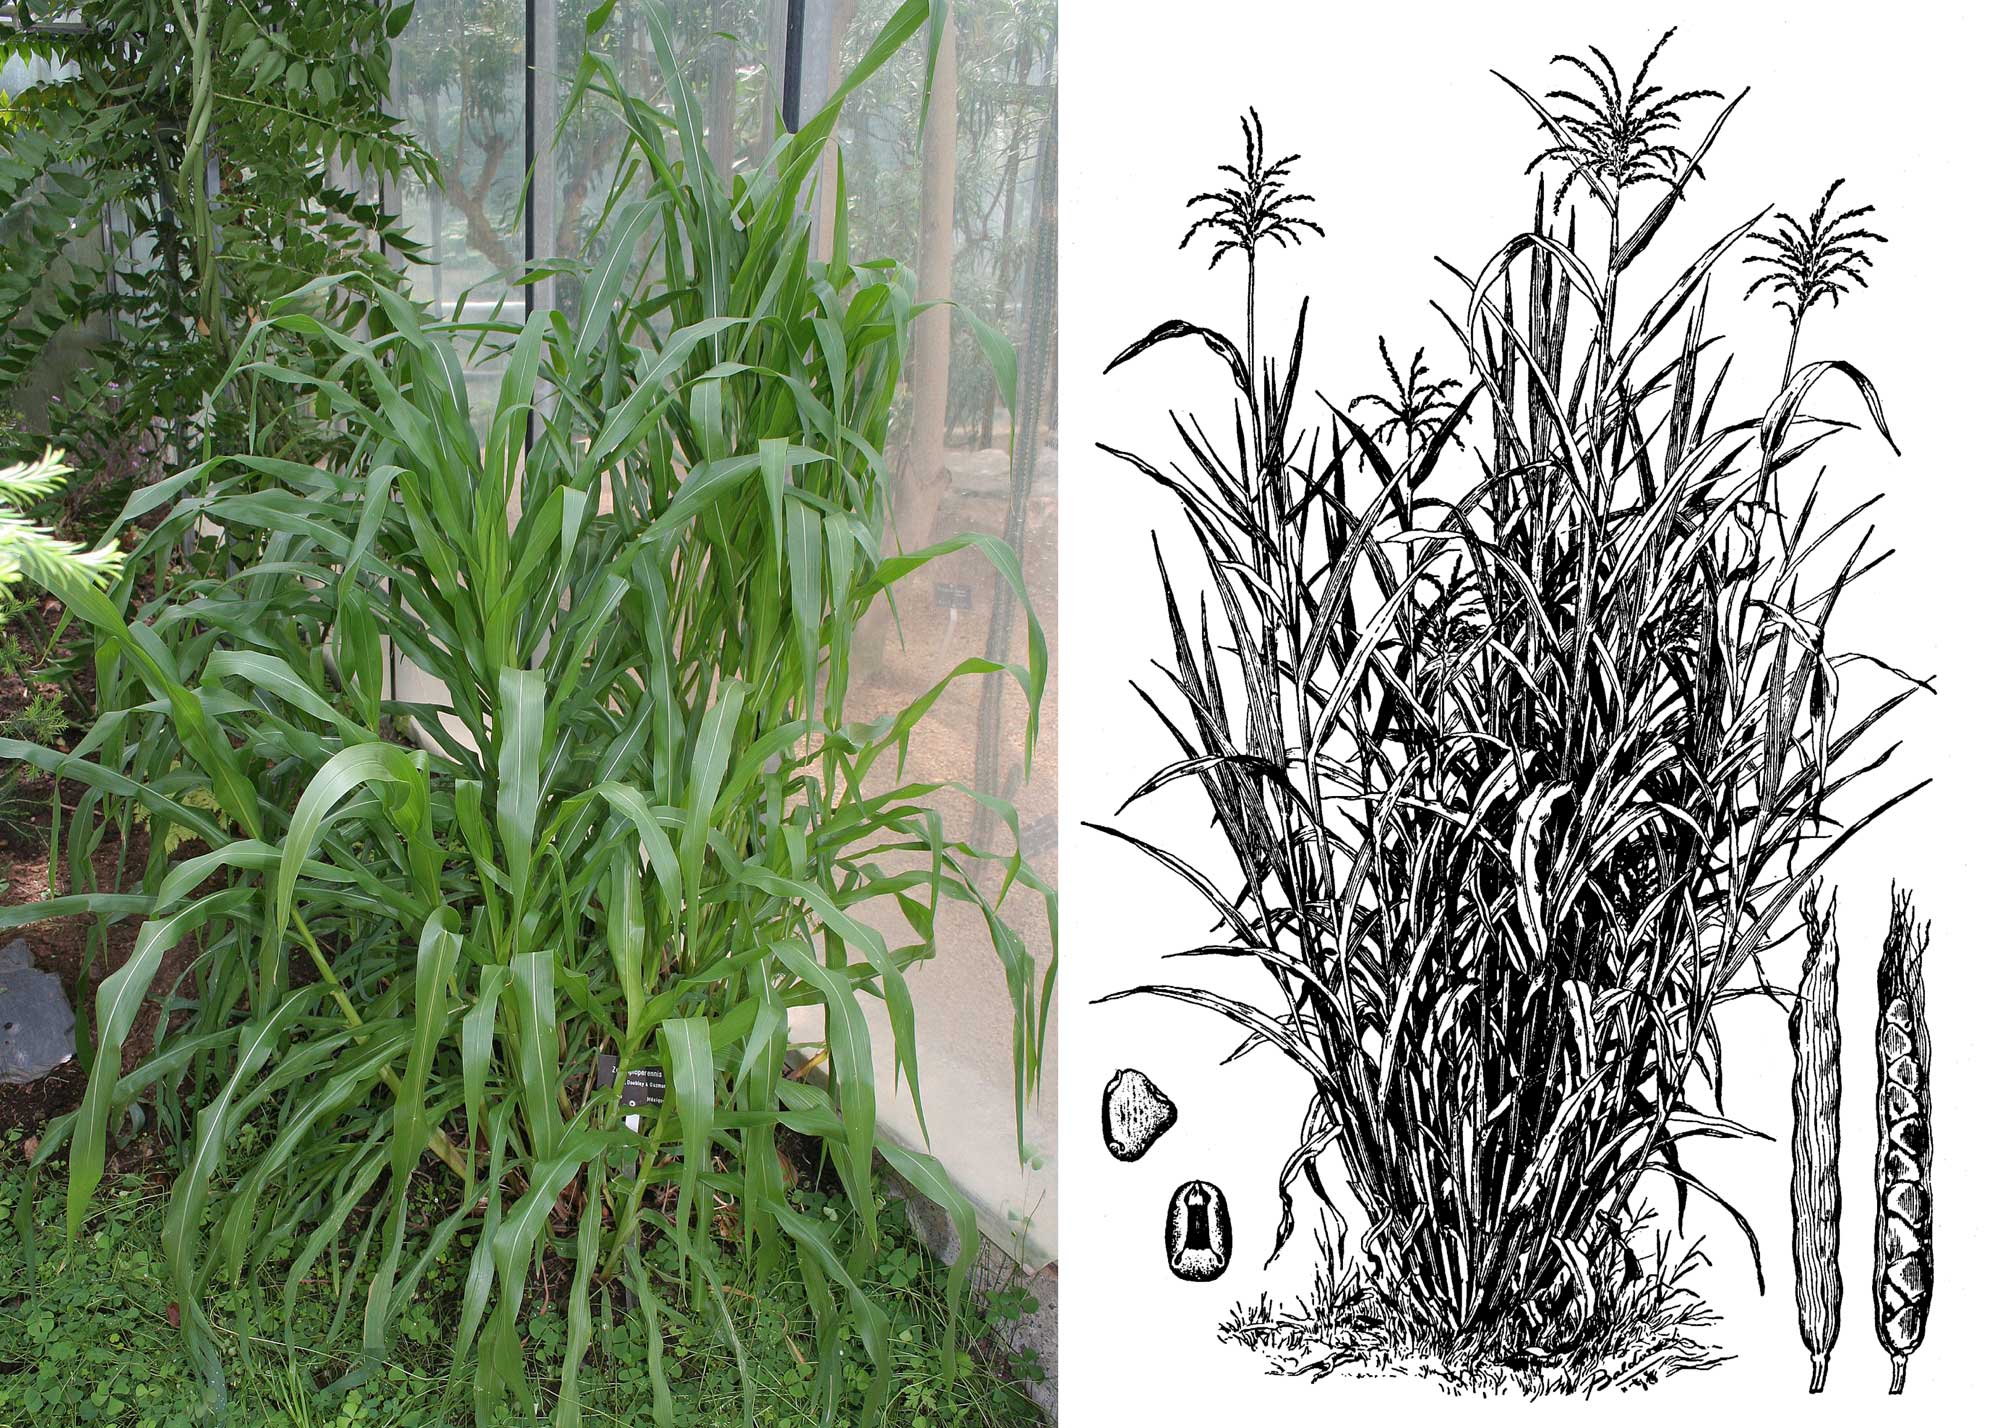 2-panel figure showing the growth form of teosinte. Panel 1: Photograph of a teosinte plant showing its branching structure. Panel 2: Black and white drawing of a teosinte plant showing how it branches to form a clump. Details of the ears (female inflorescences) and a kernel are shown to the sides of the plant.